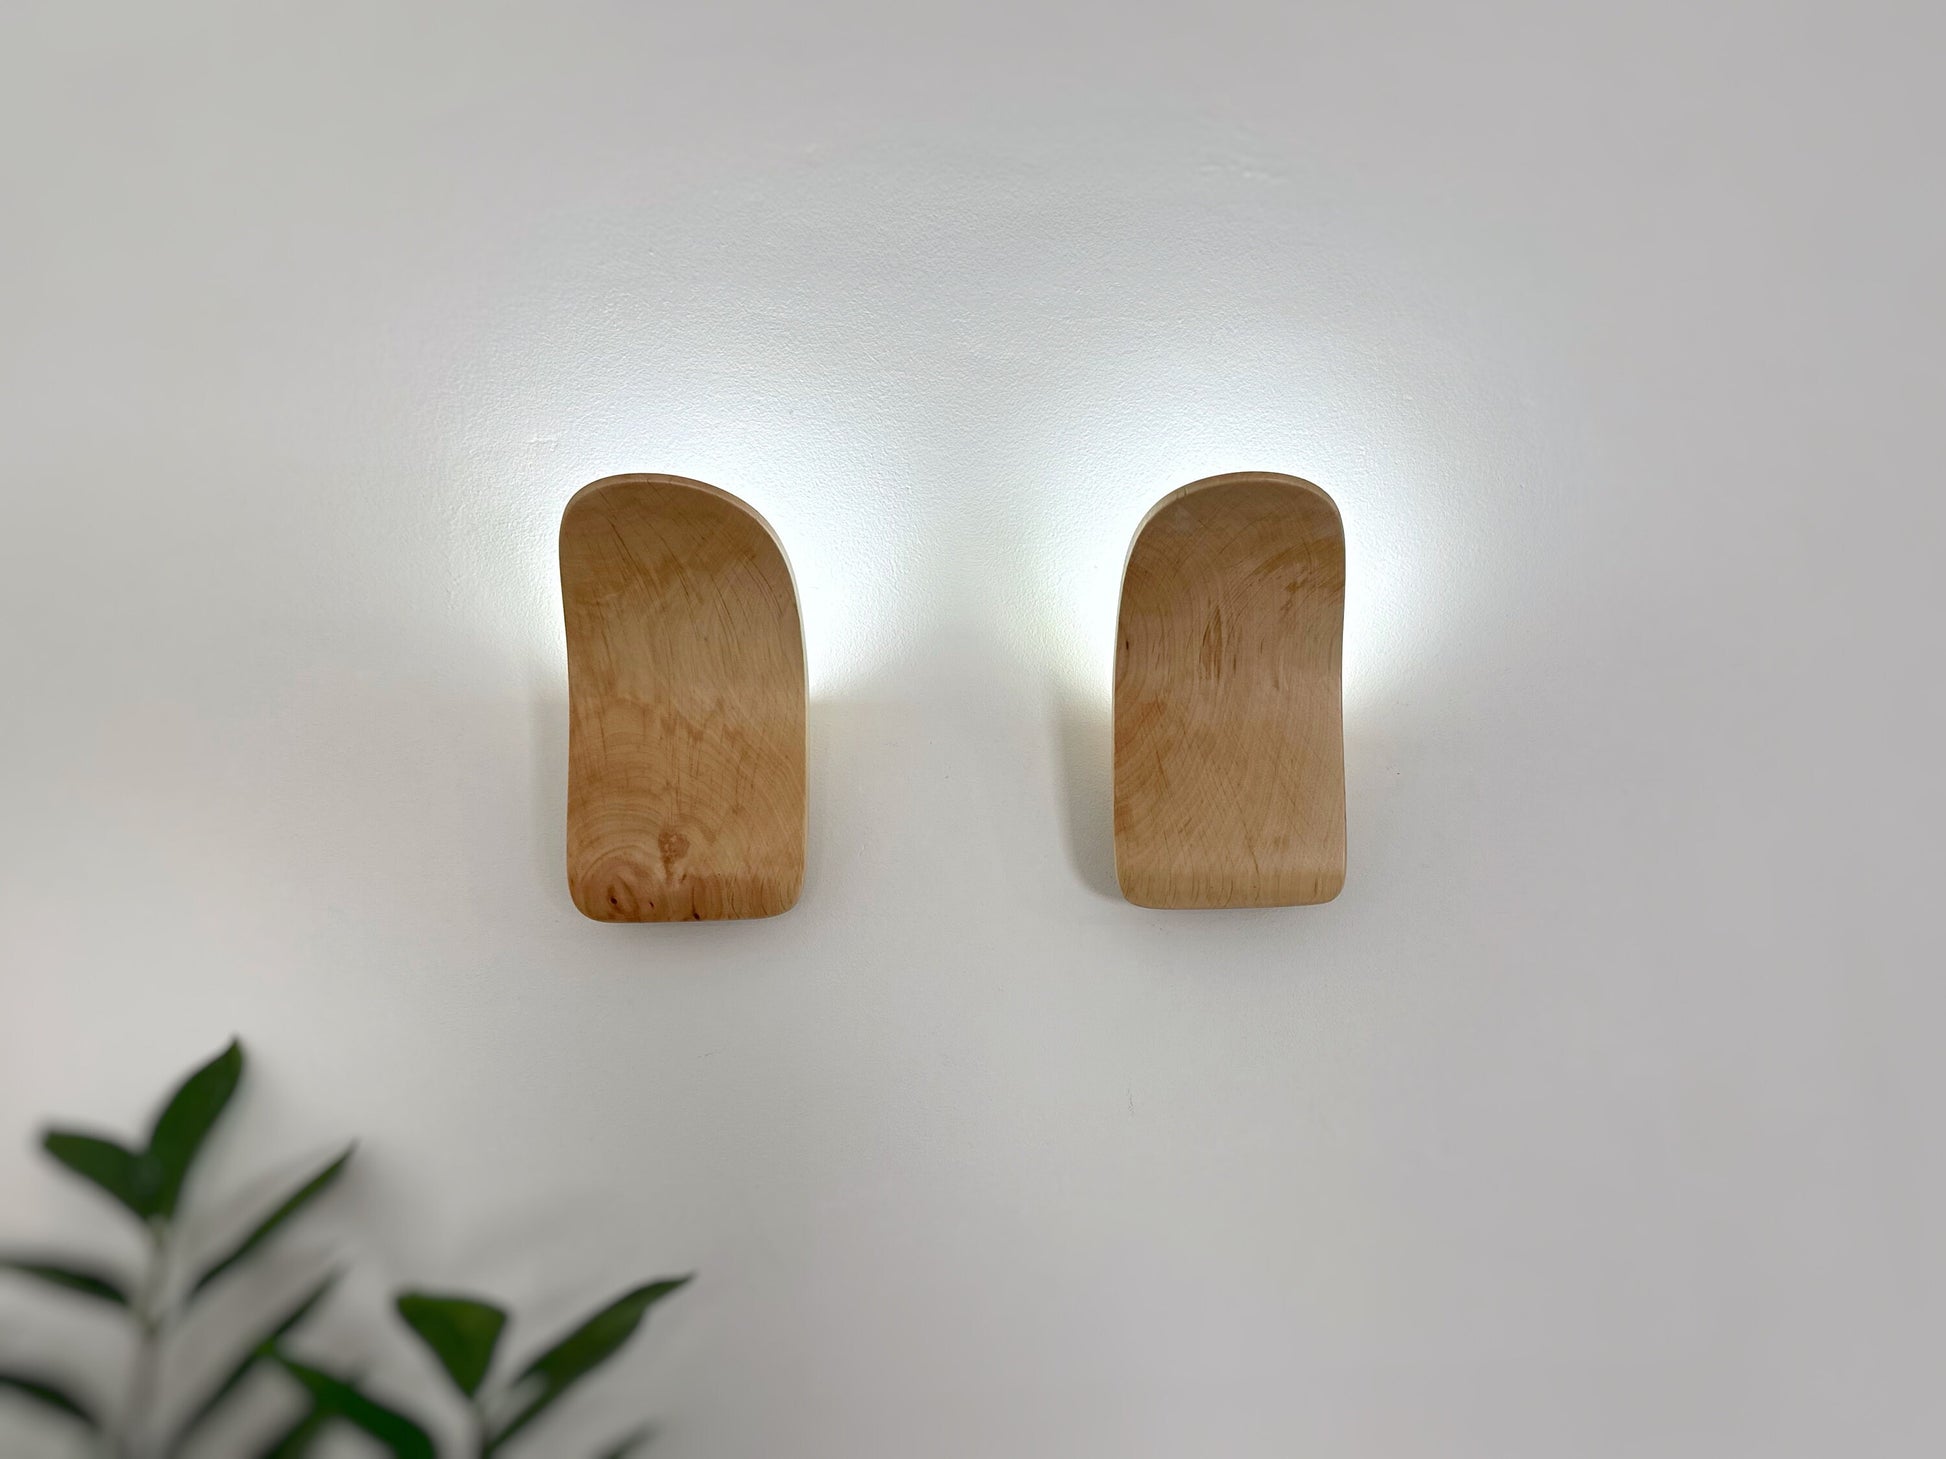 Handmade wood plug in wall sconce or with switch fixture, custom size wall bedside lamp, sconce lighting, lampshades, wall lights, wandlampe